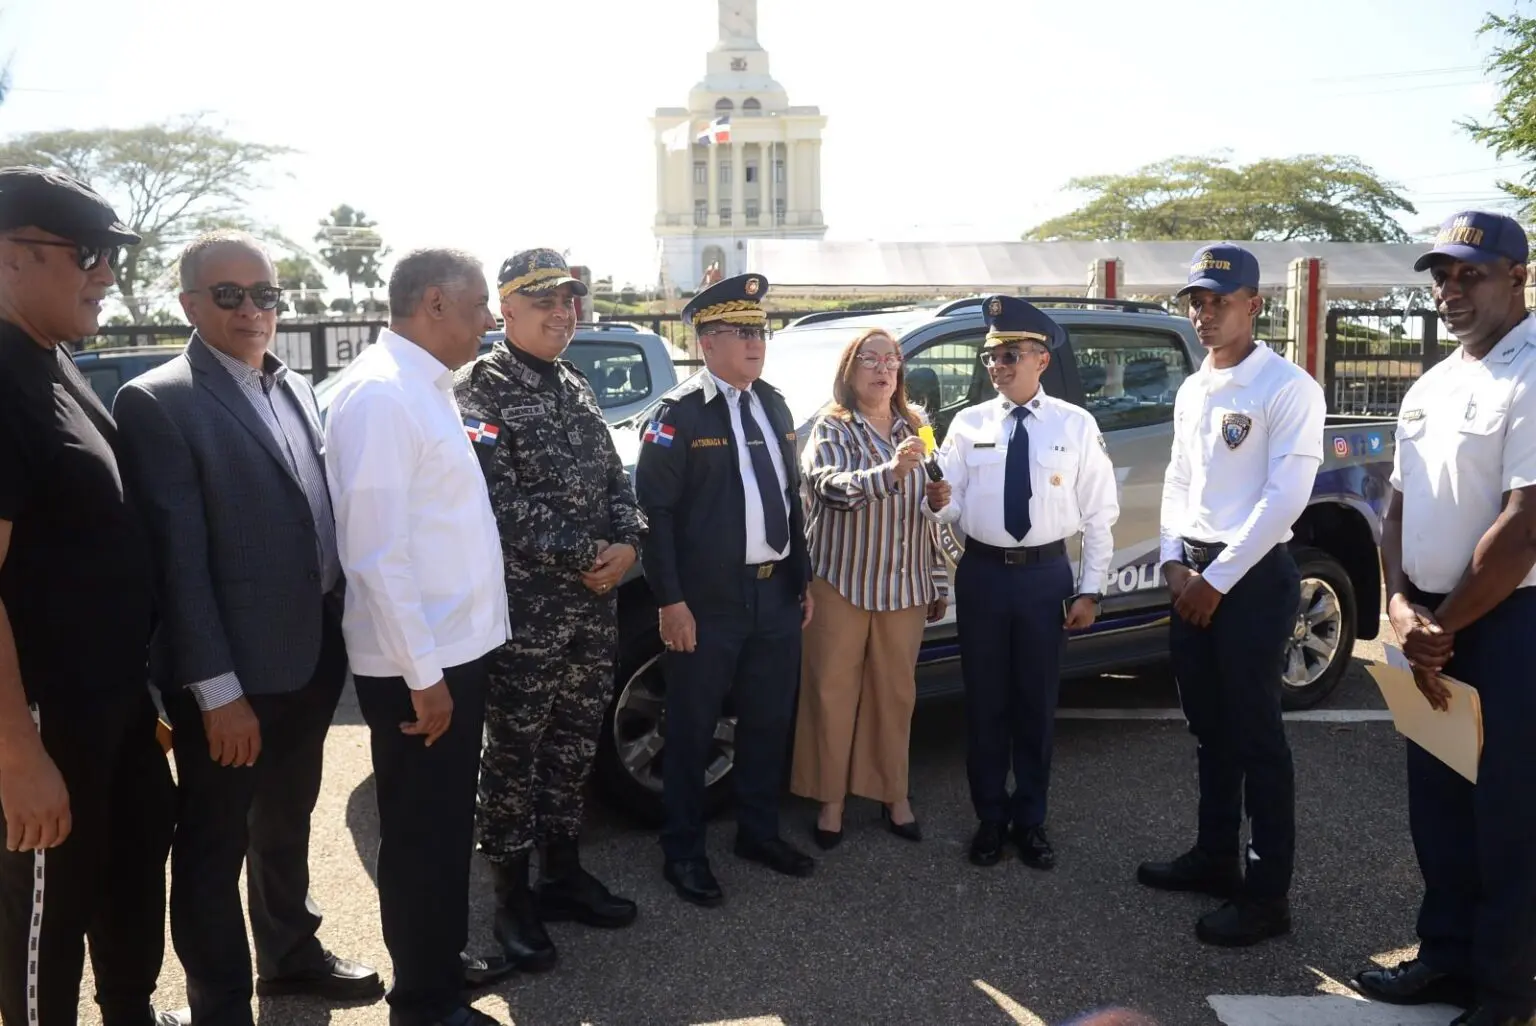 Politur delivers 7 new vehicles to reinforce tourism security in Santiago